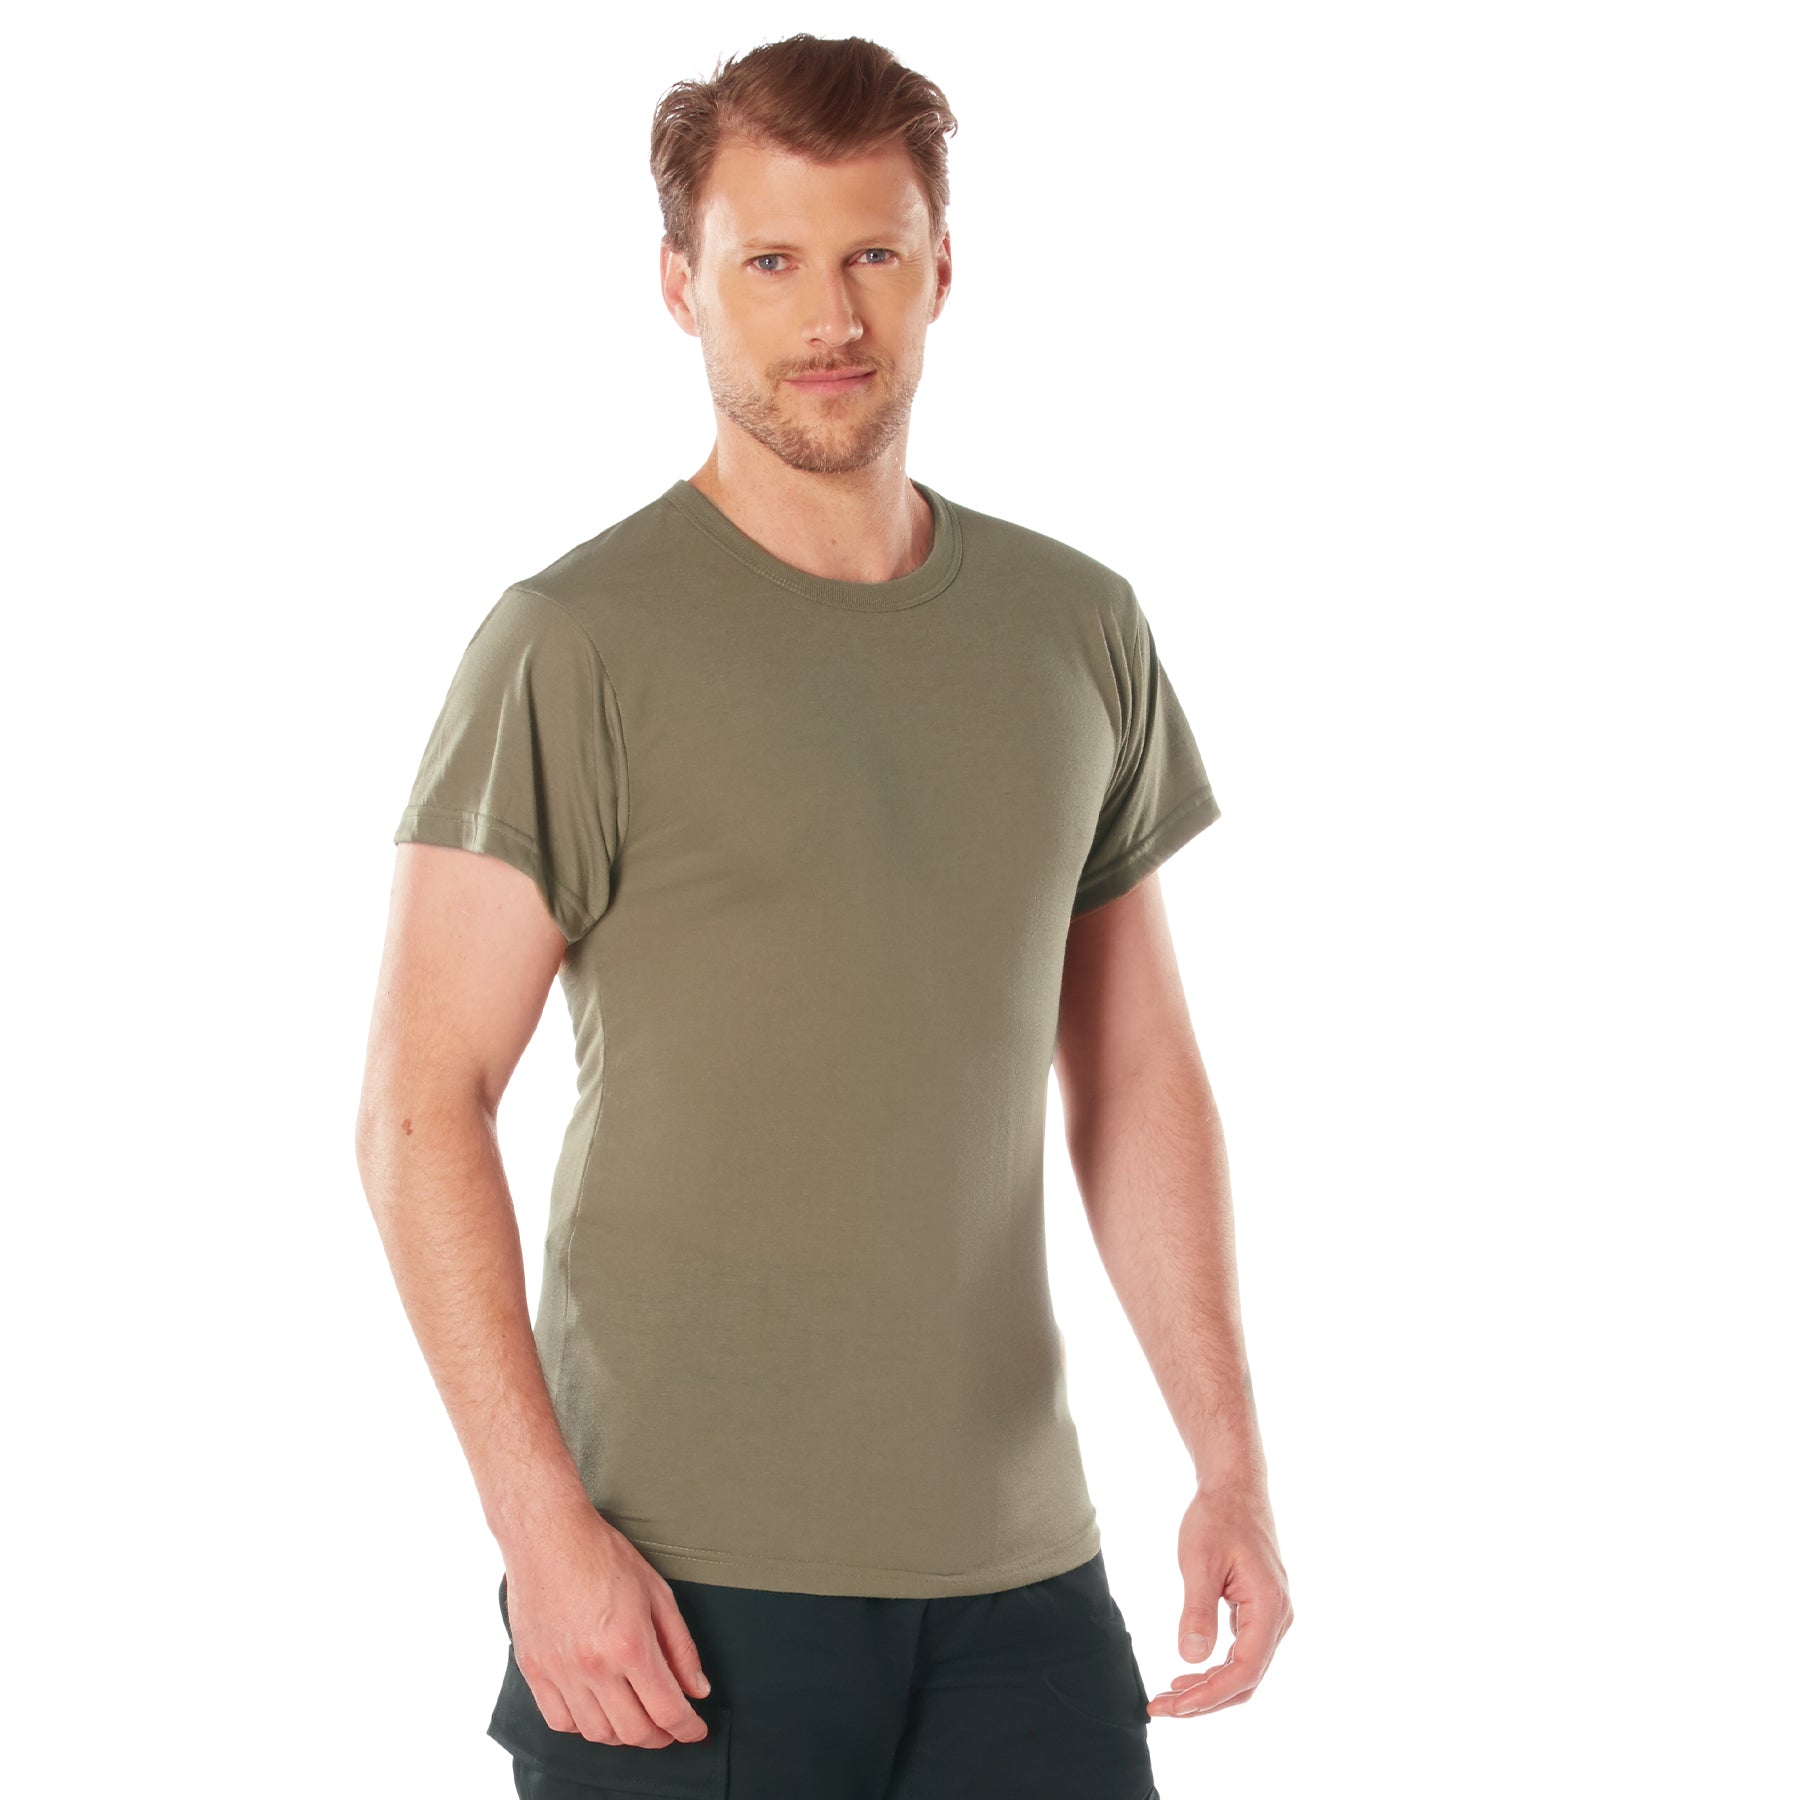 [AR 670-1] Poly Moisture Wicking T-Shirts